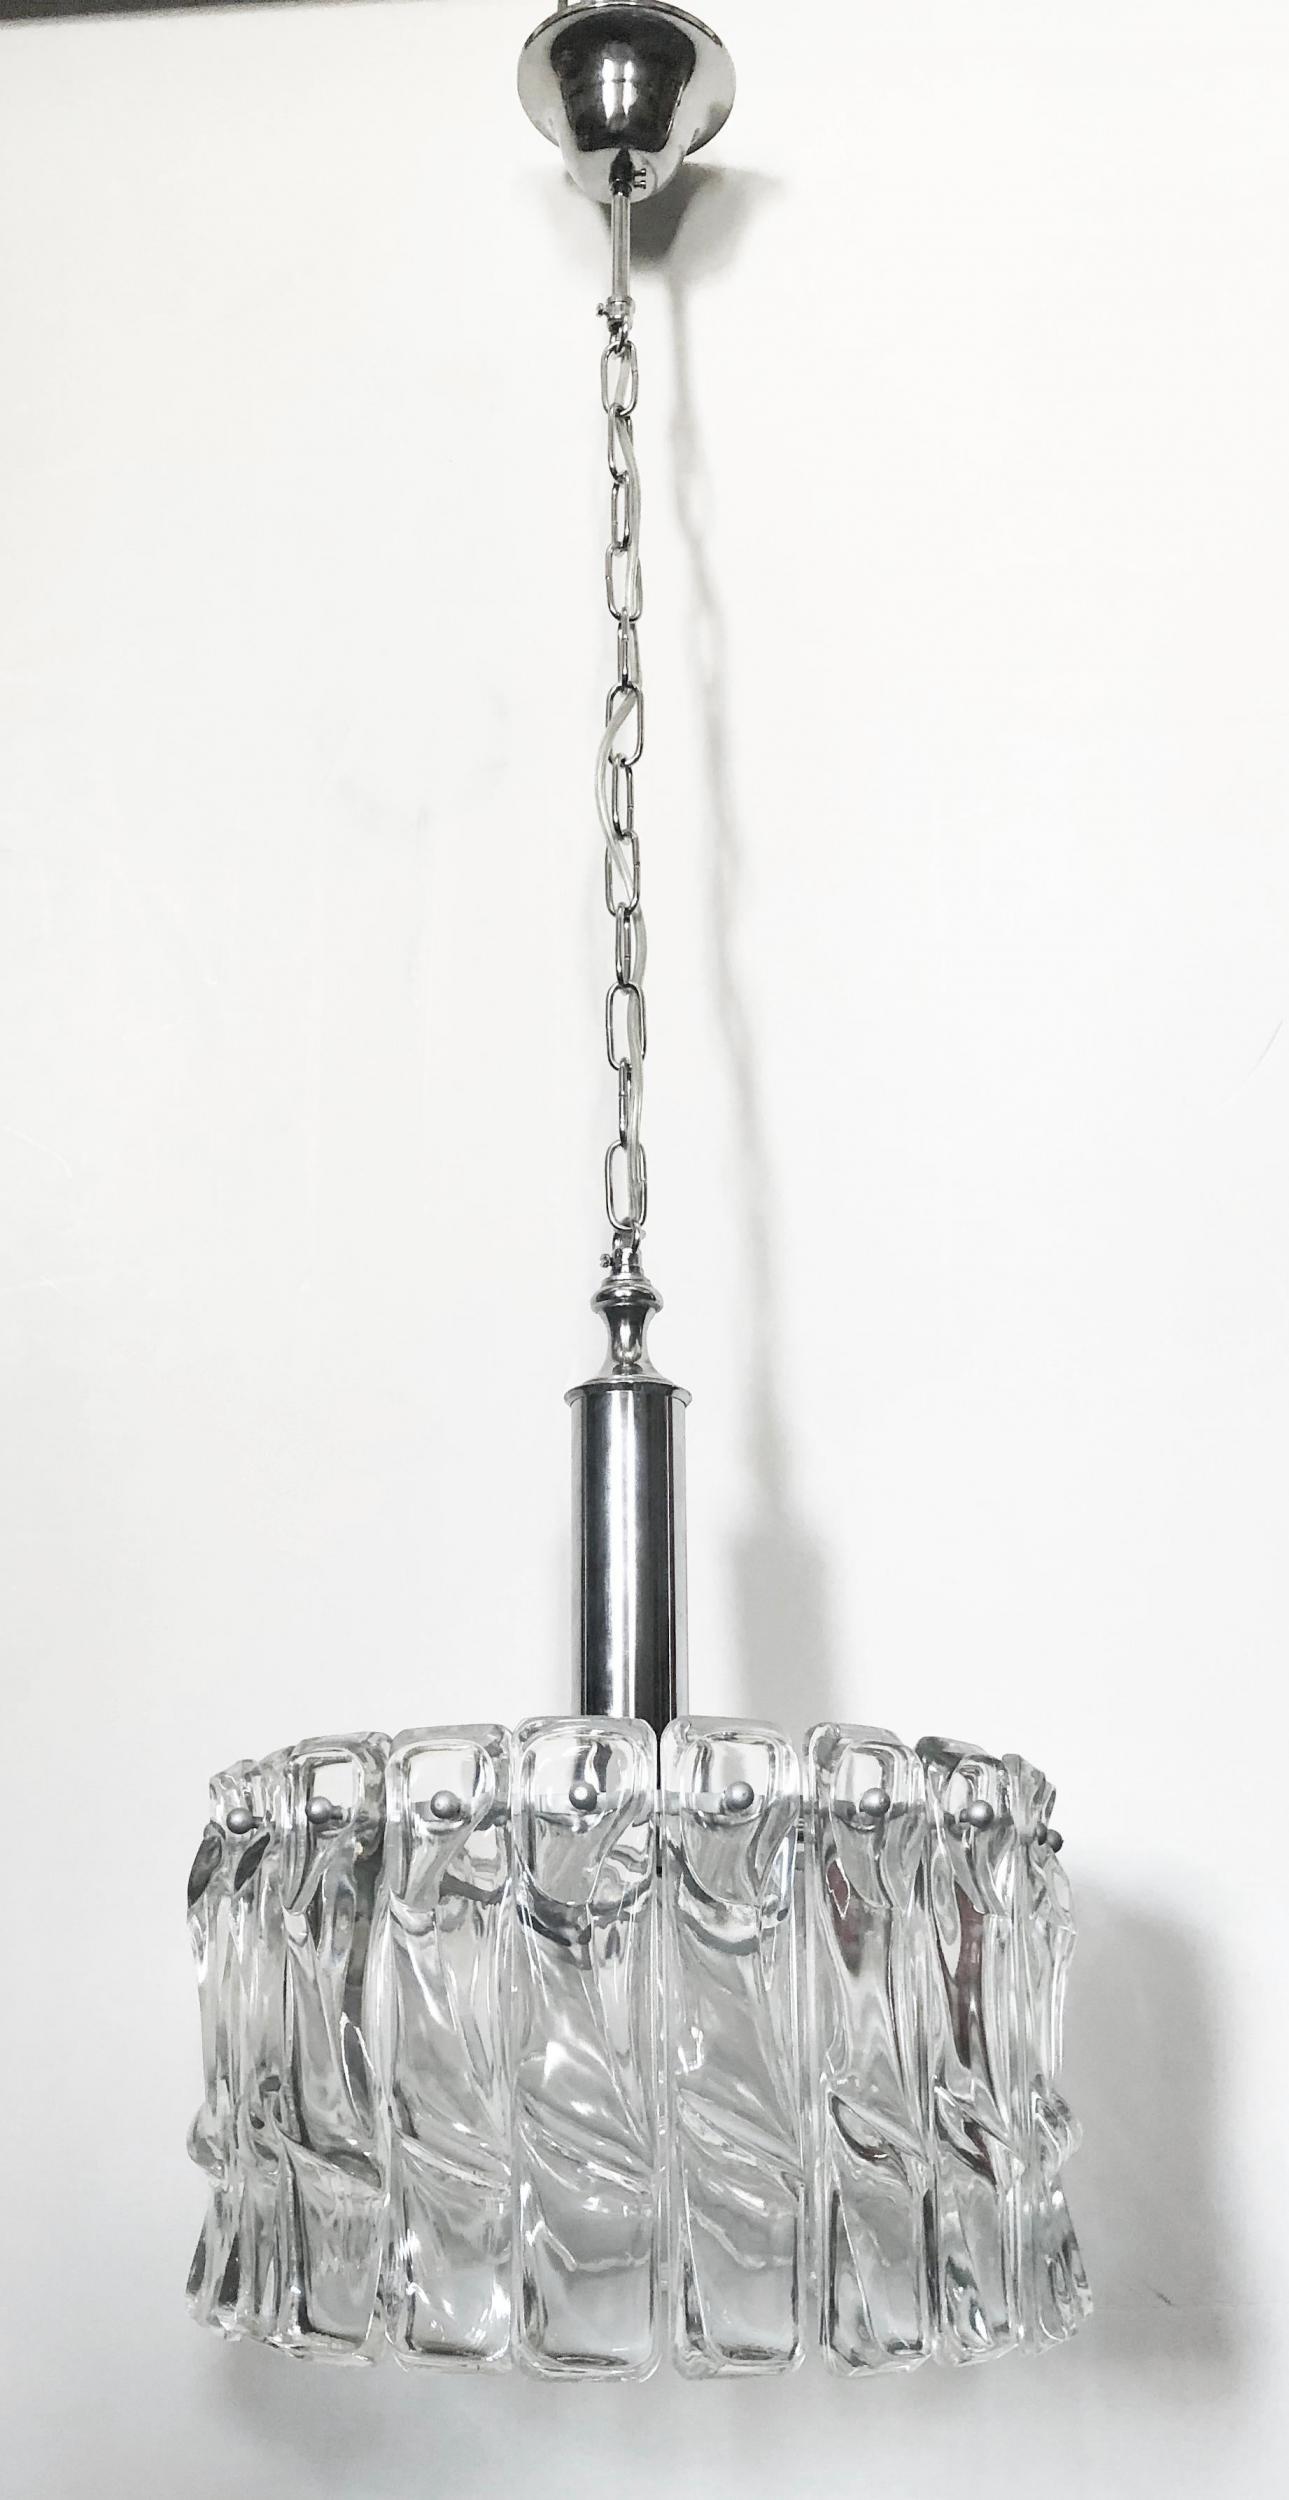 Vintage Italian Chandelier w/ clear textured Murano glass pendant with nickel hardware / Made in Italy in the 1960s.